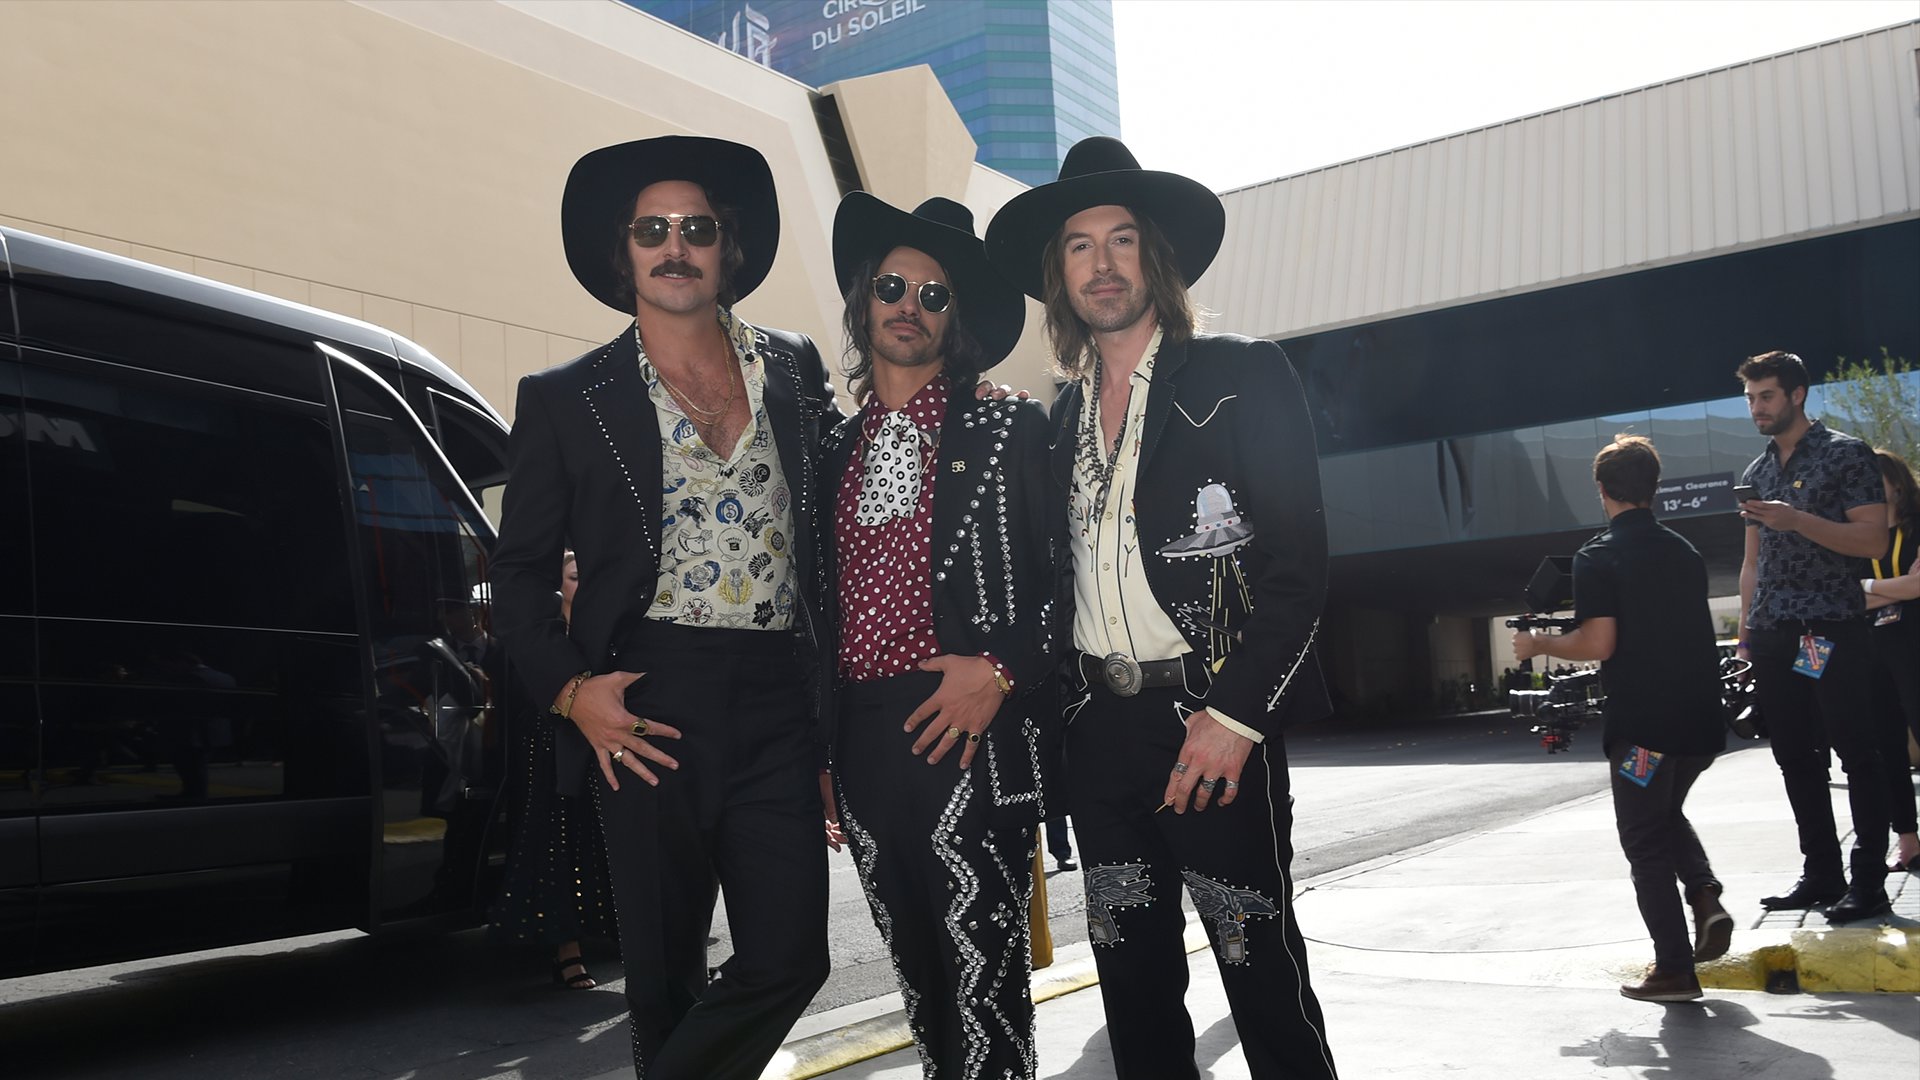 Midland, winner of New Vocal Duo or Group of the Year, wear matching cowboy hats on the ACM red carpet.